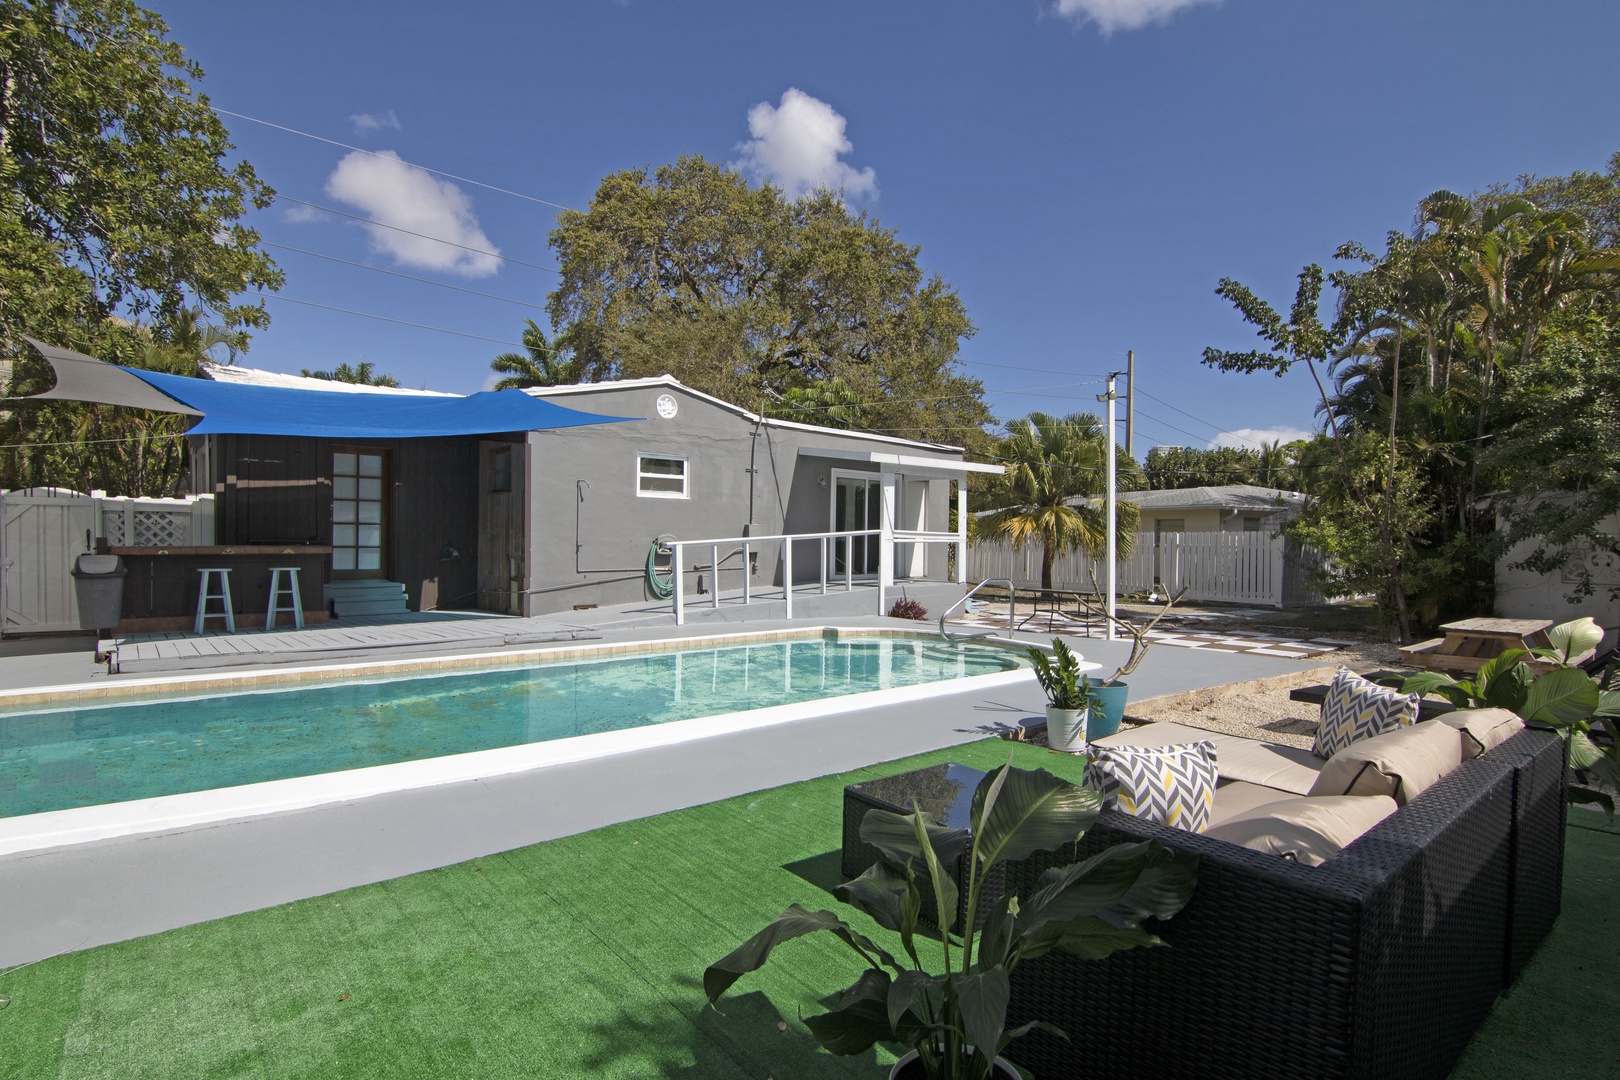 Make a splash in the sunshine in the property’s sparkling shared pool